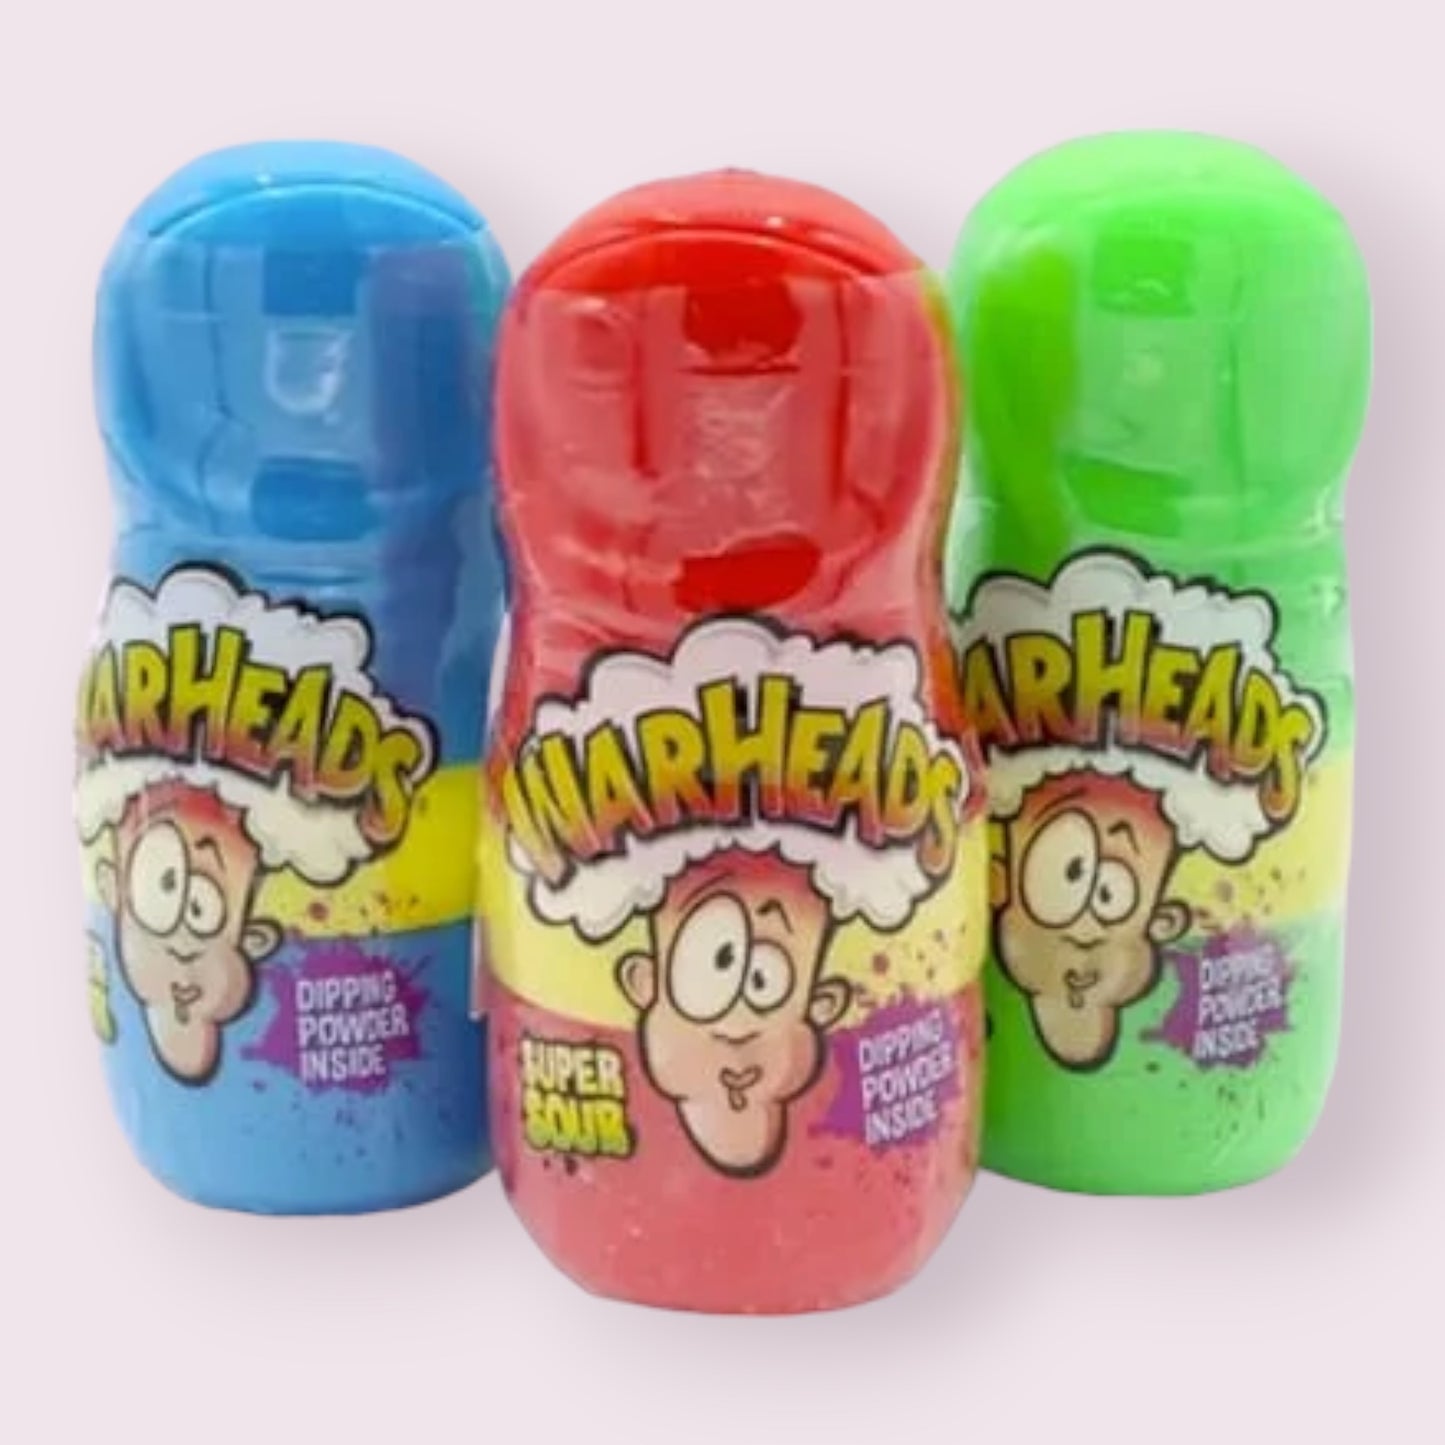 Warheads Thumb Dipper Sour Candy  Pixie Candy Shoppe   